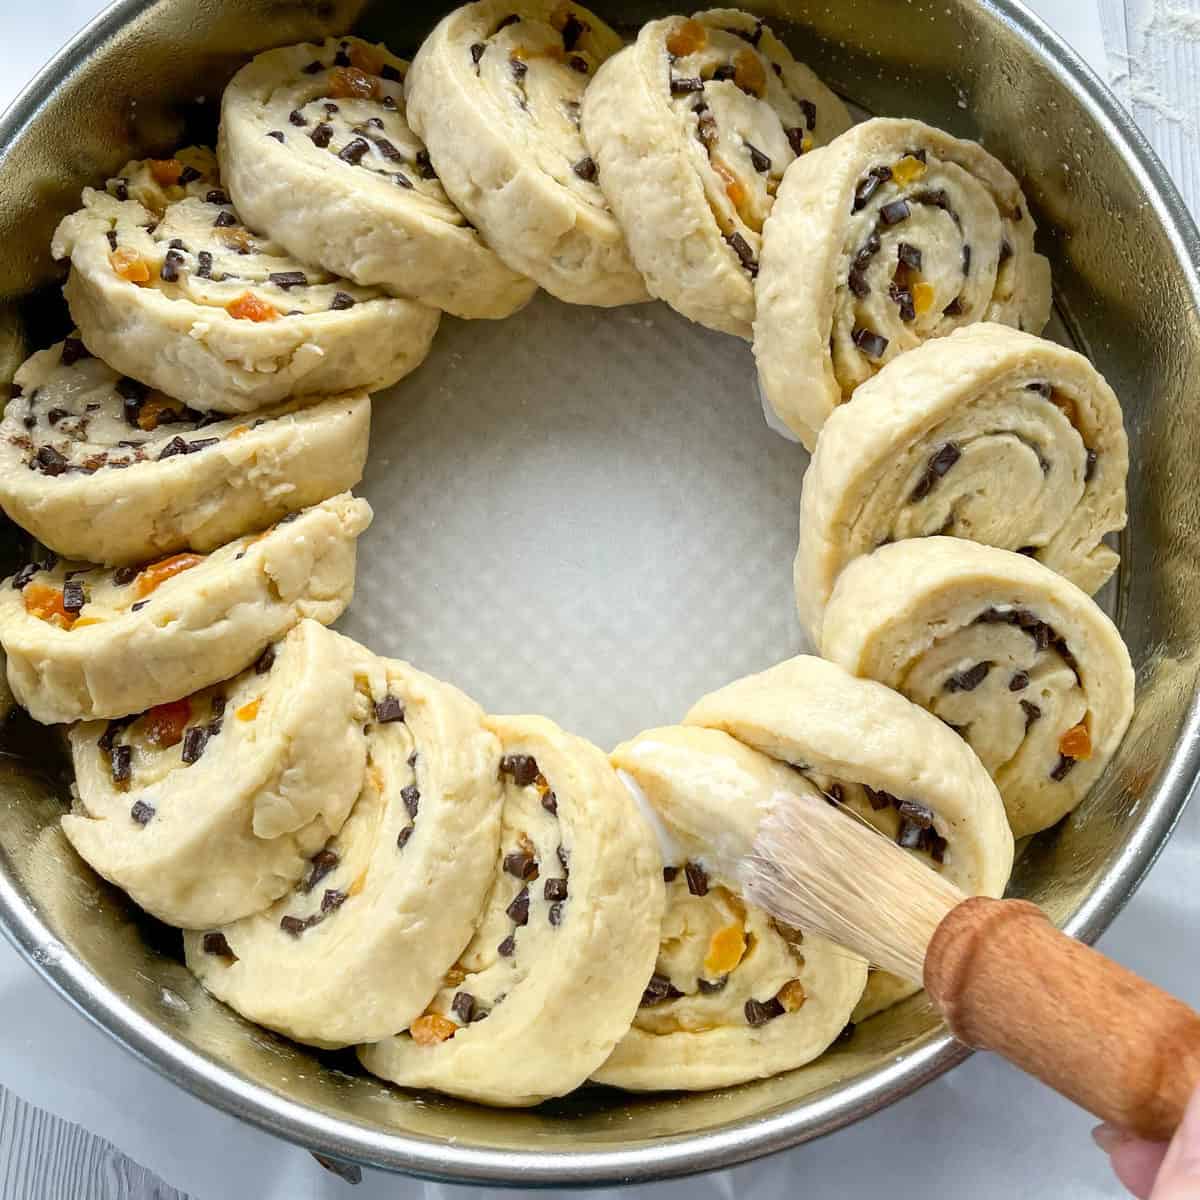 How to arrange the pieces of scrolls into the tin and glaze with milk